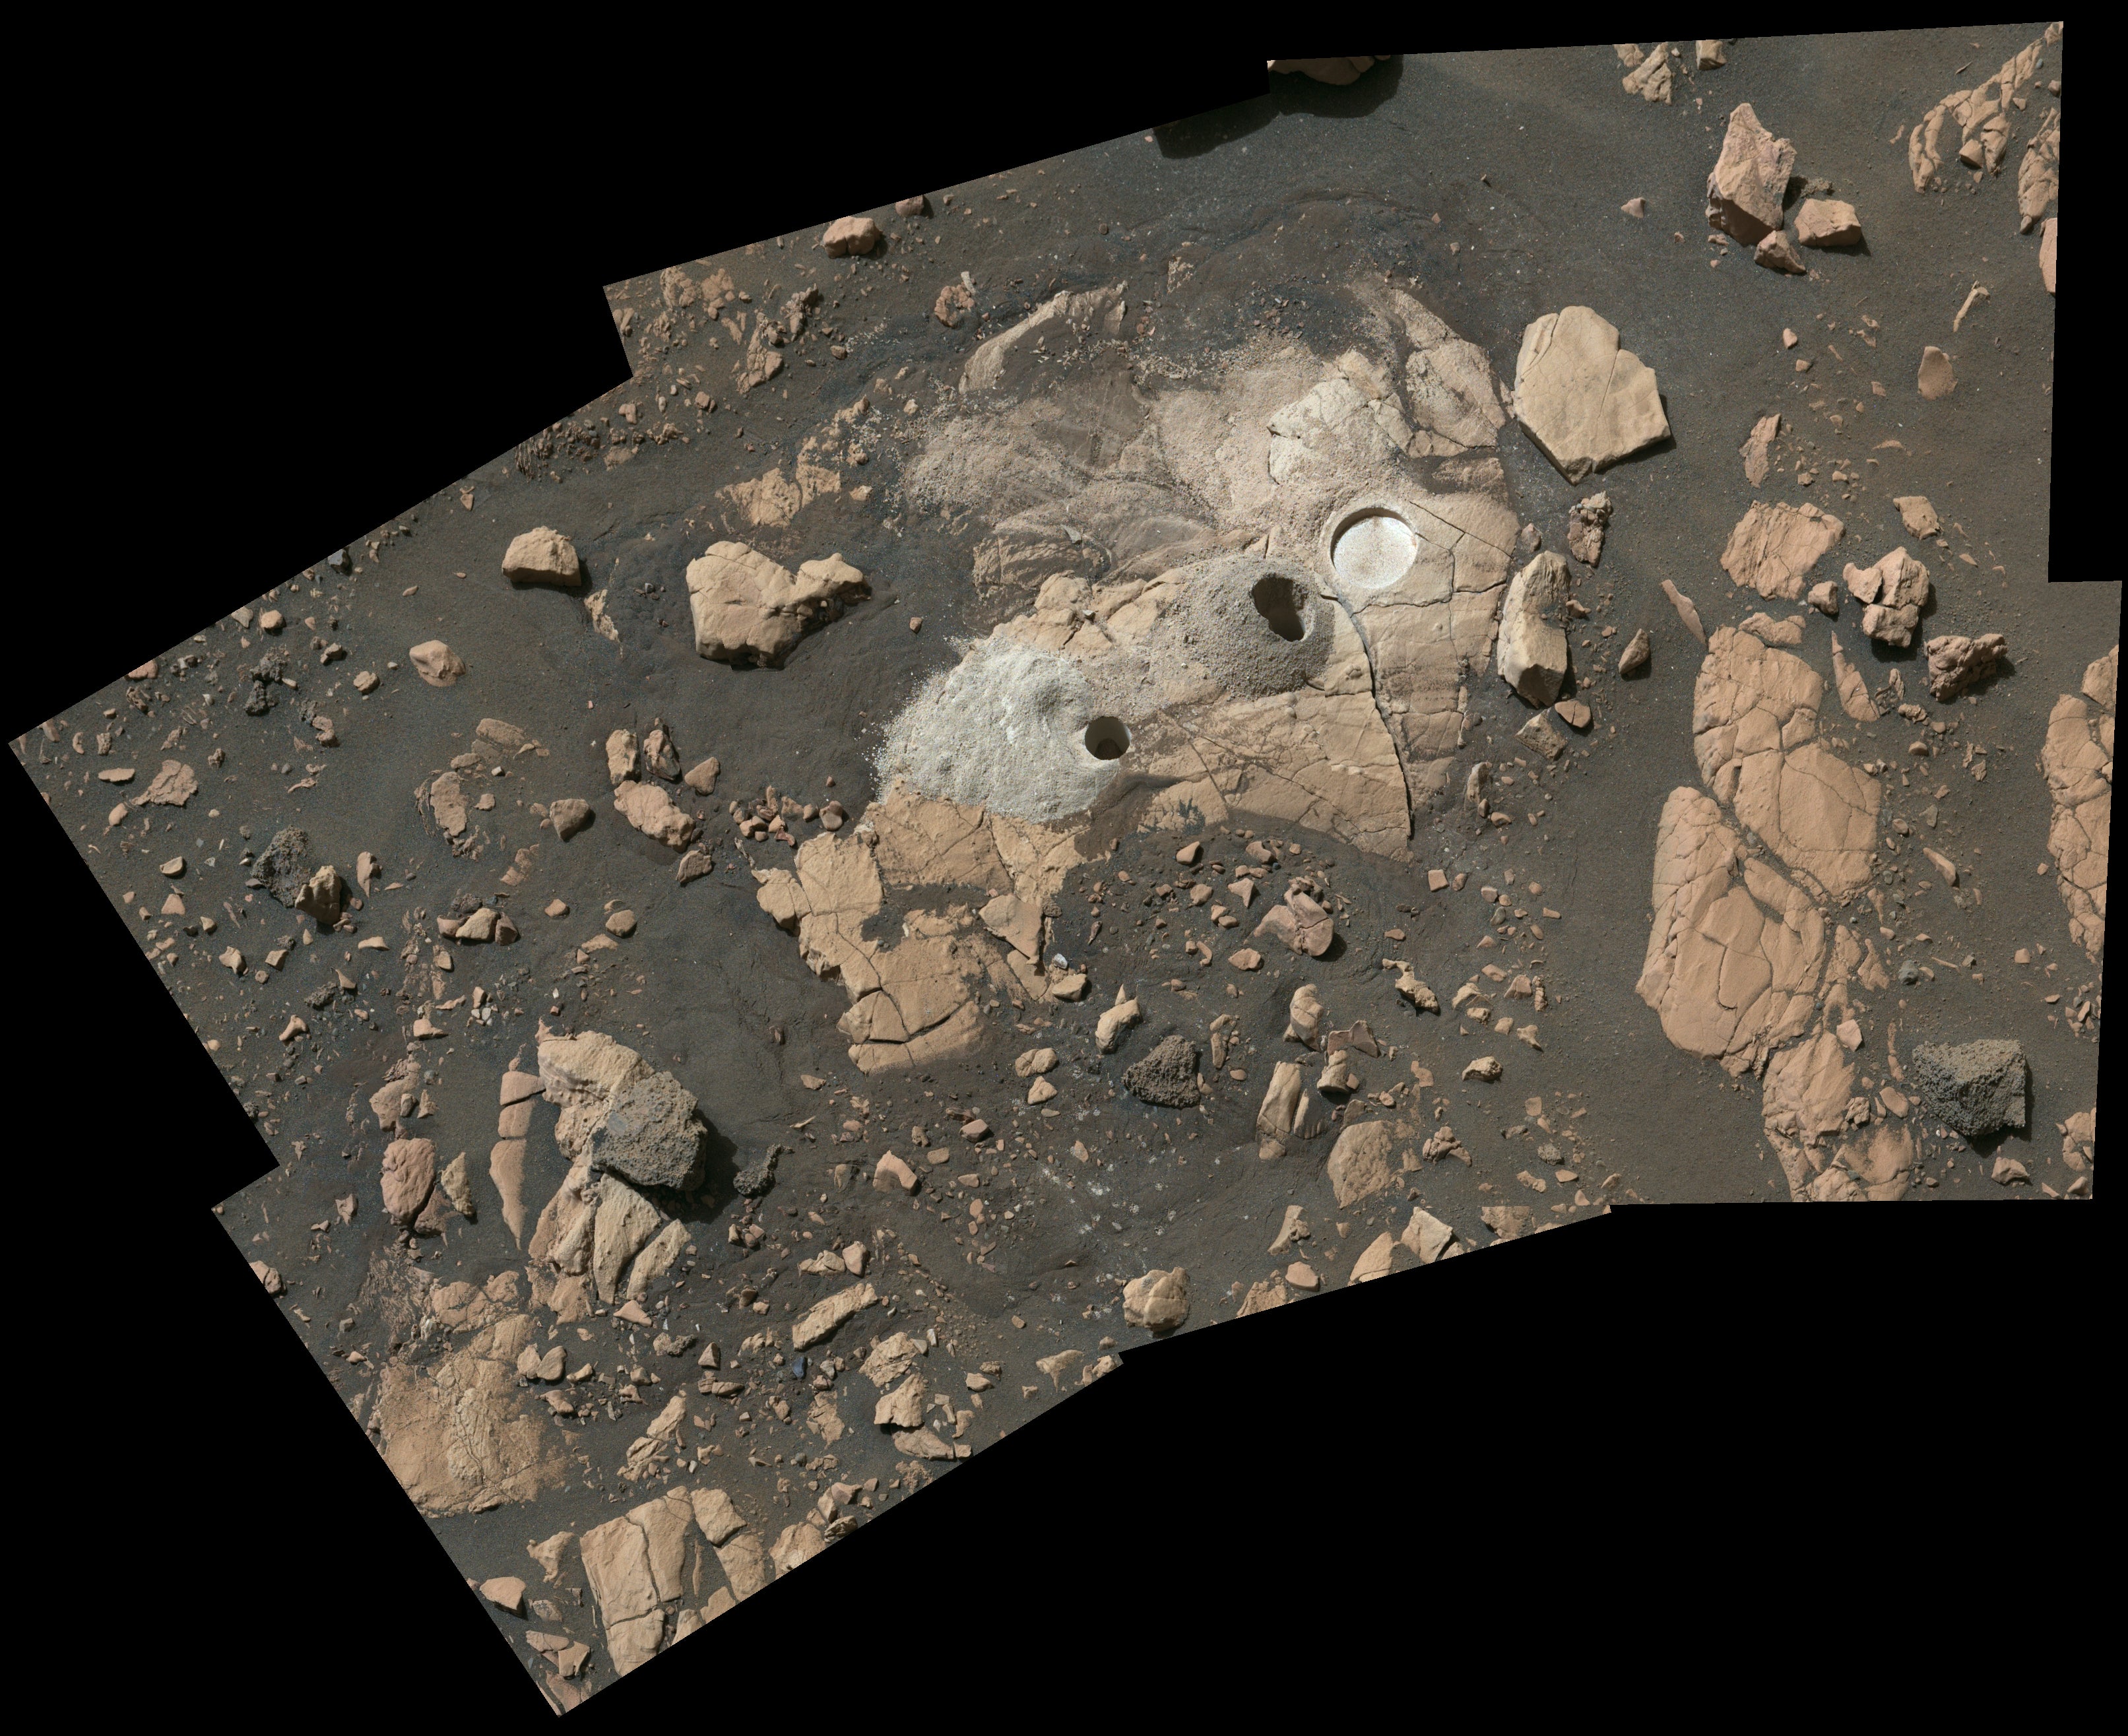 Rocks sampled by Nasa’s Perseverance rover on Mars have shown signs of organic compounds, the “building blocks” of life